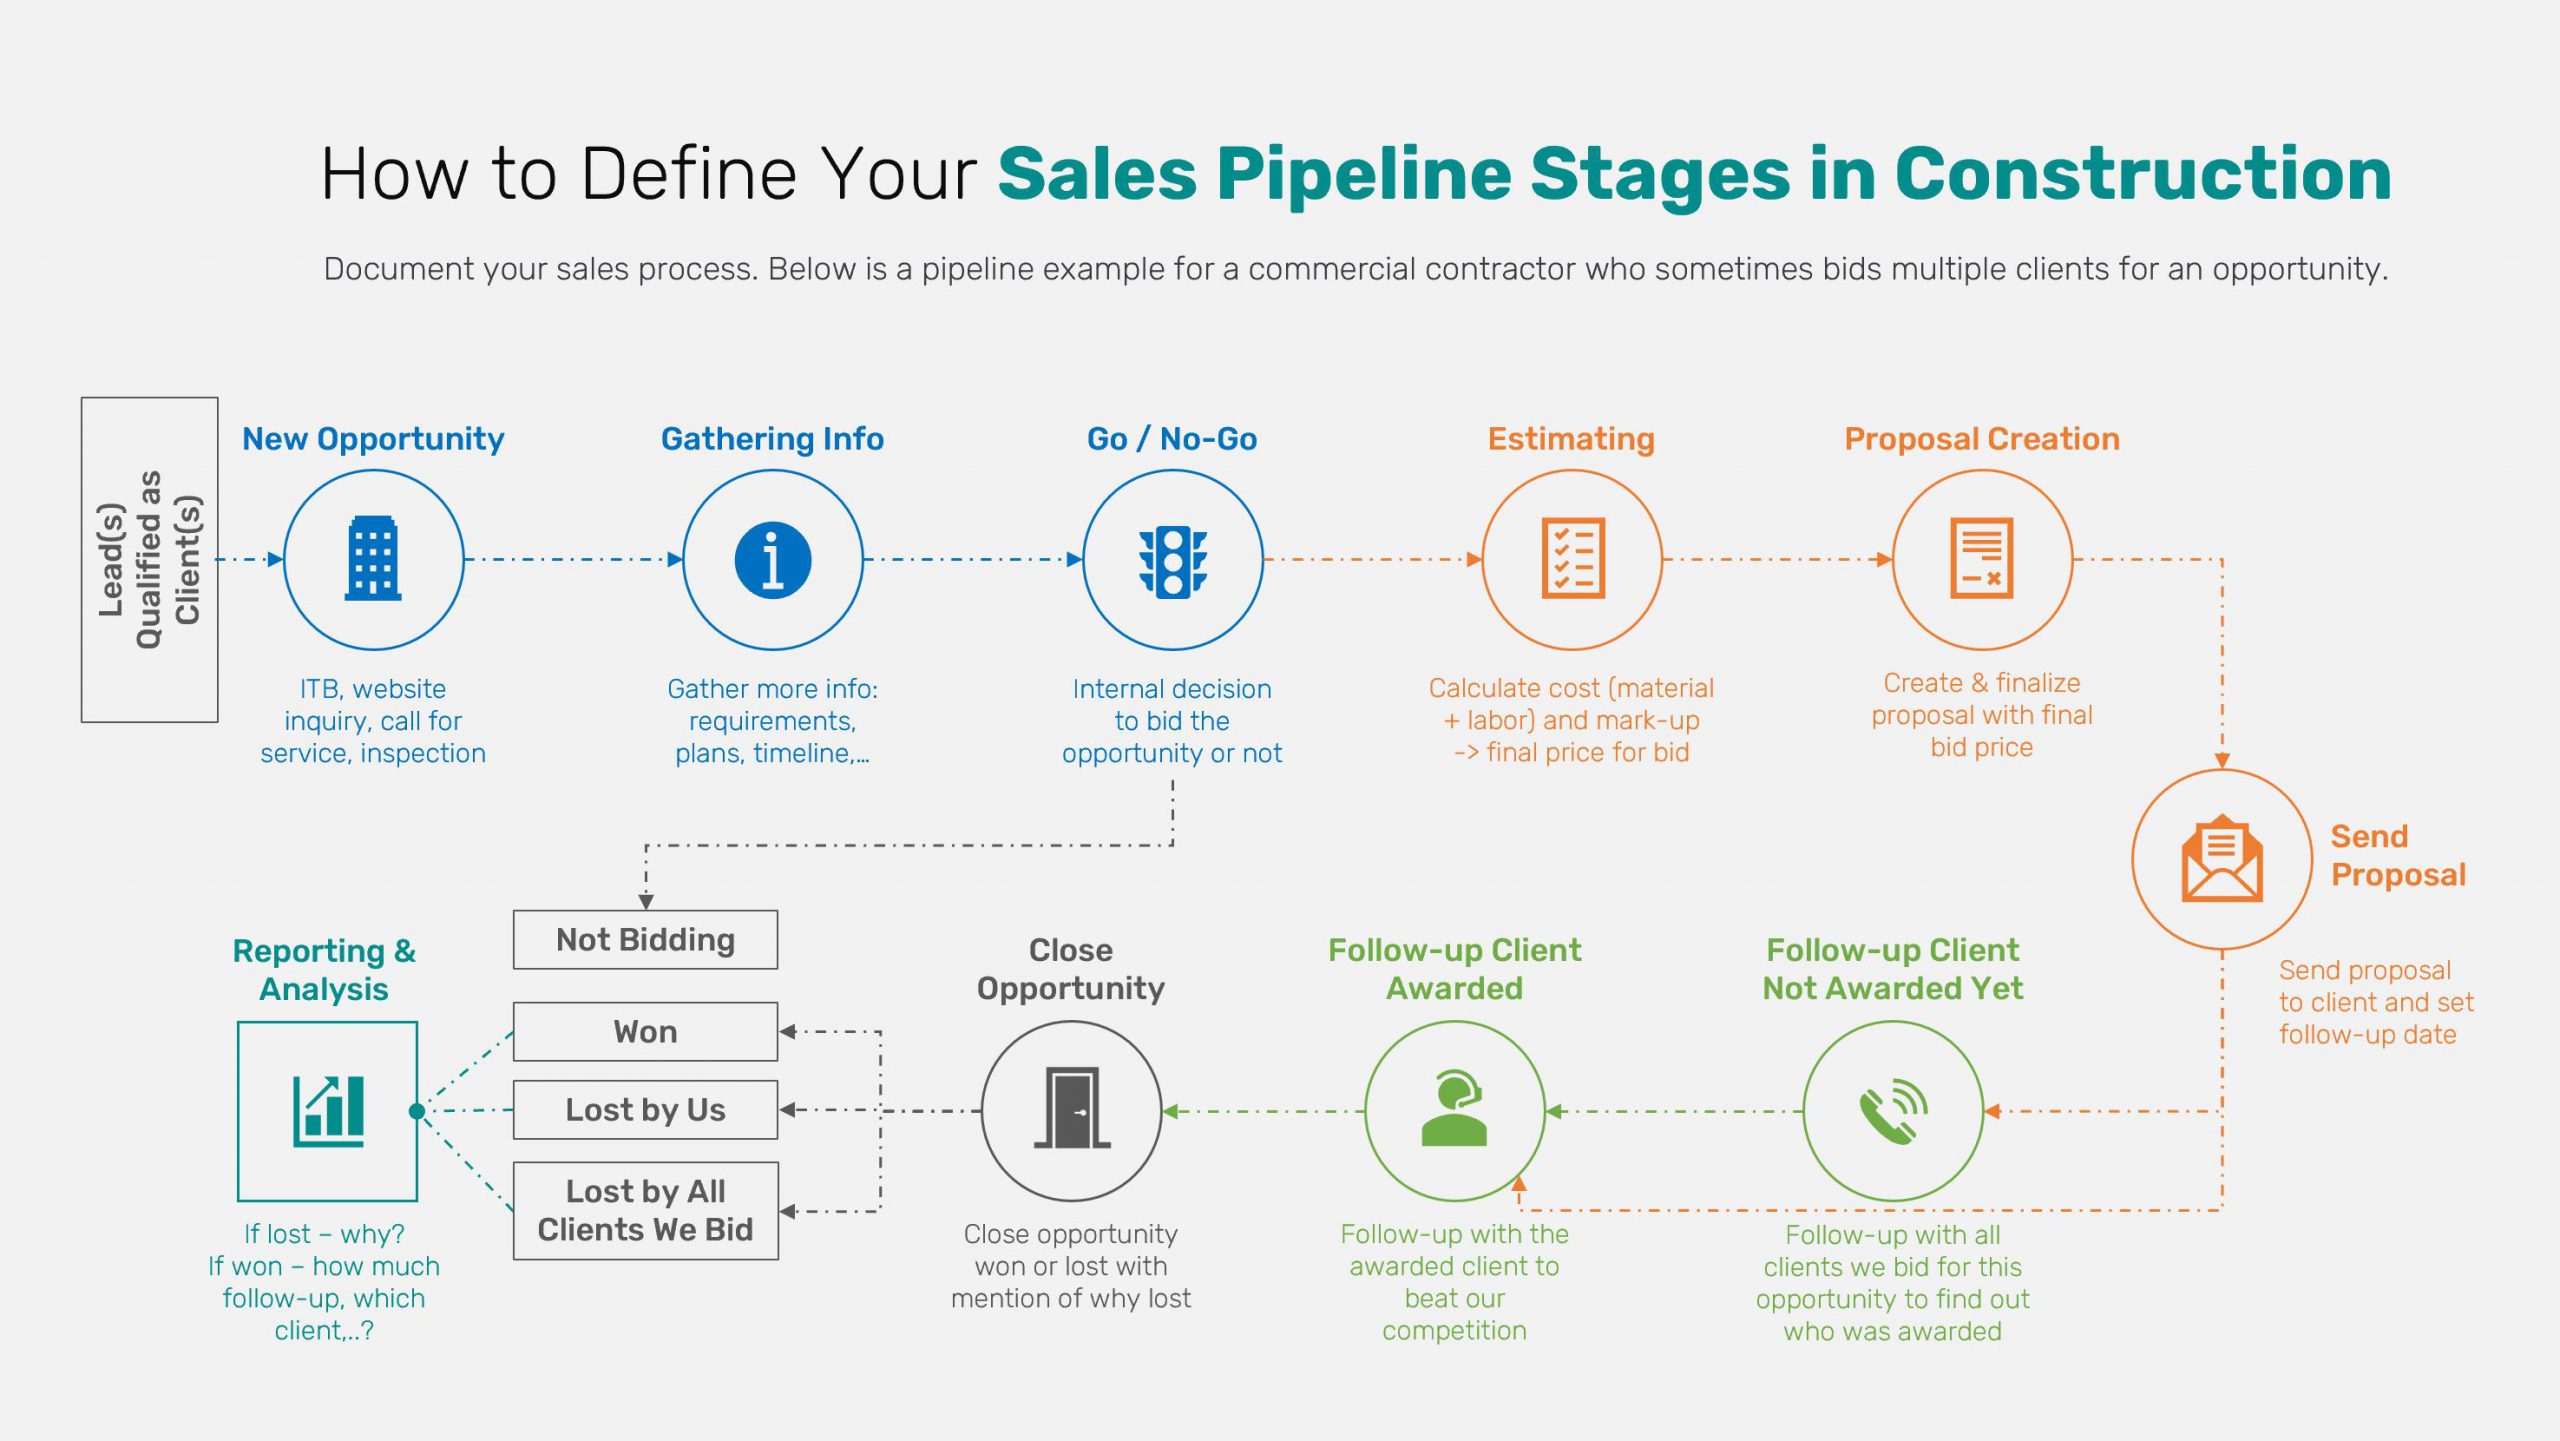 Example of sales pipeline - Sales pipeline stages in construction